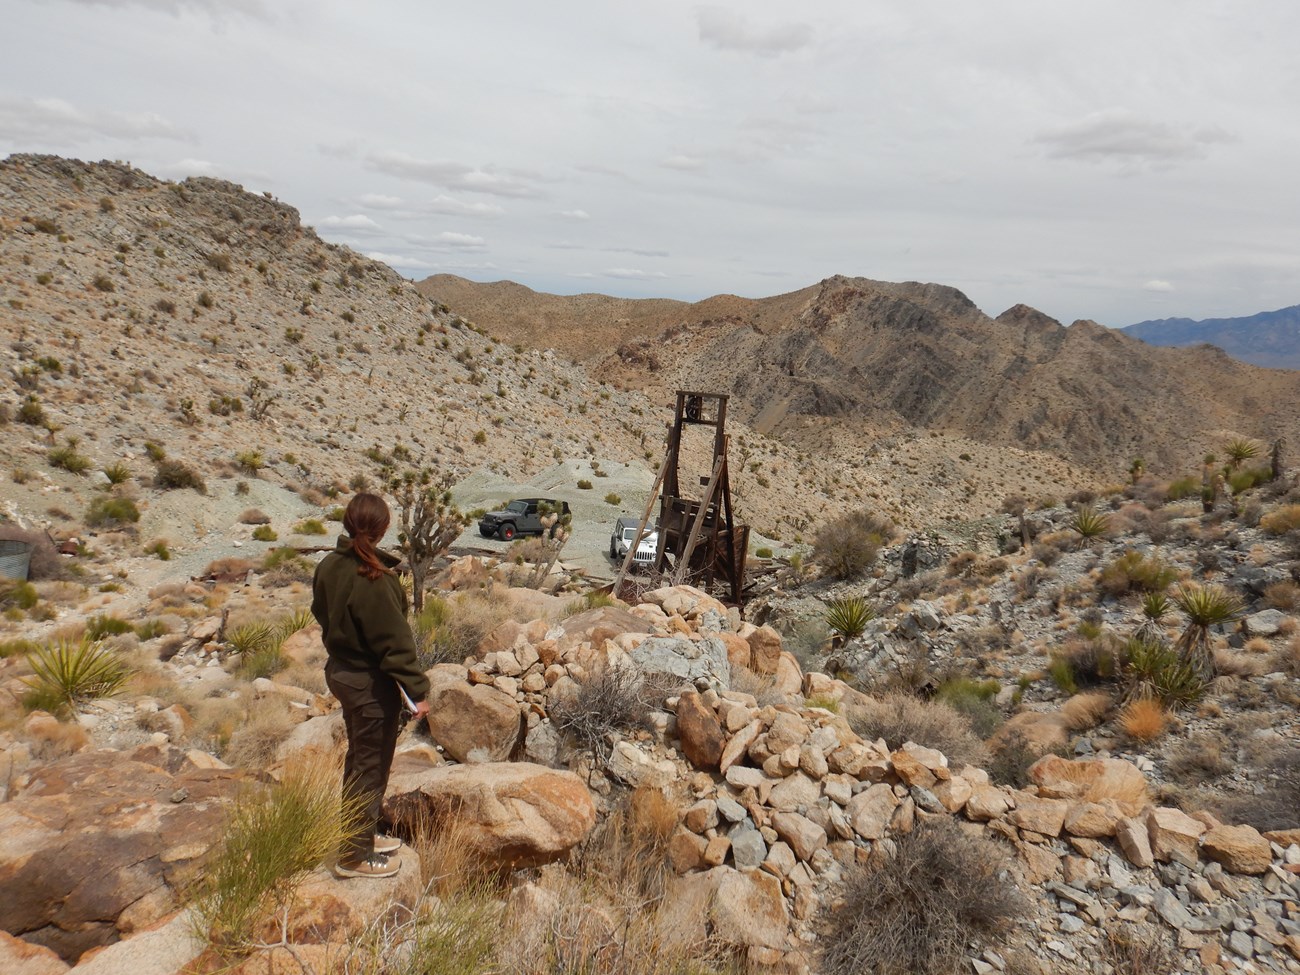 photo of a park employee inspecting a mine site in a rocky desert landscape. In the distance, 2 Jeeps can be seen parked near a mining headframe.